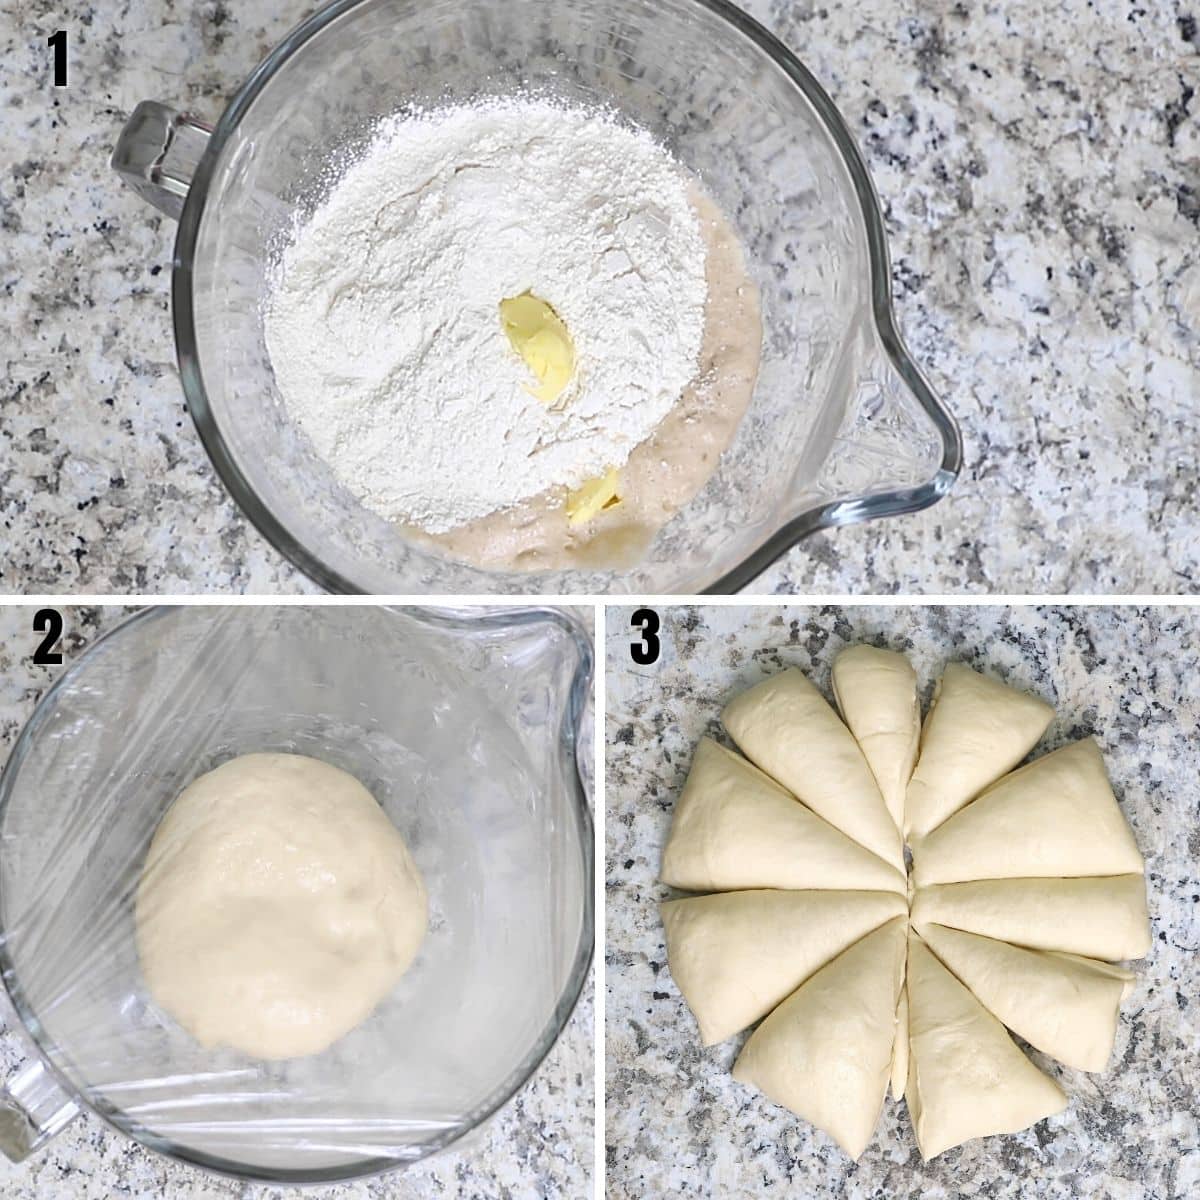 A collage of 3 images showing how to make hot dog buns dough.